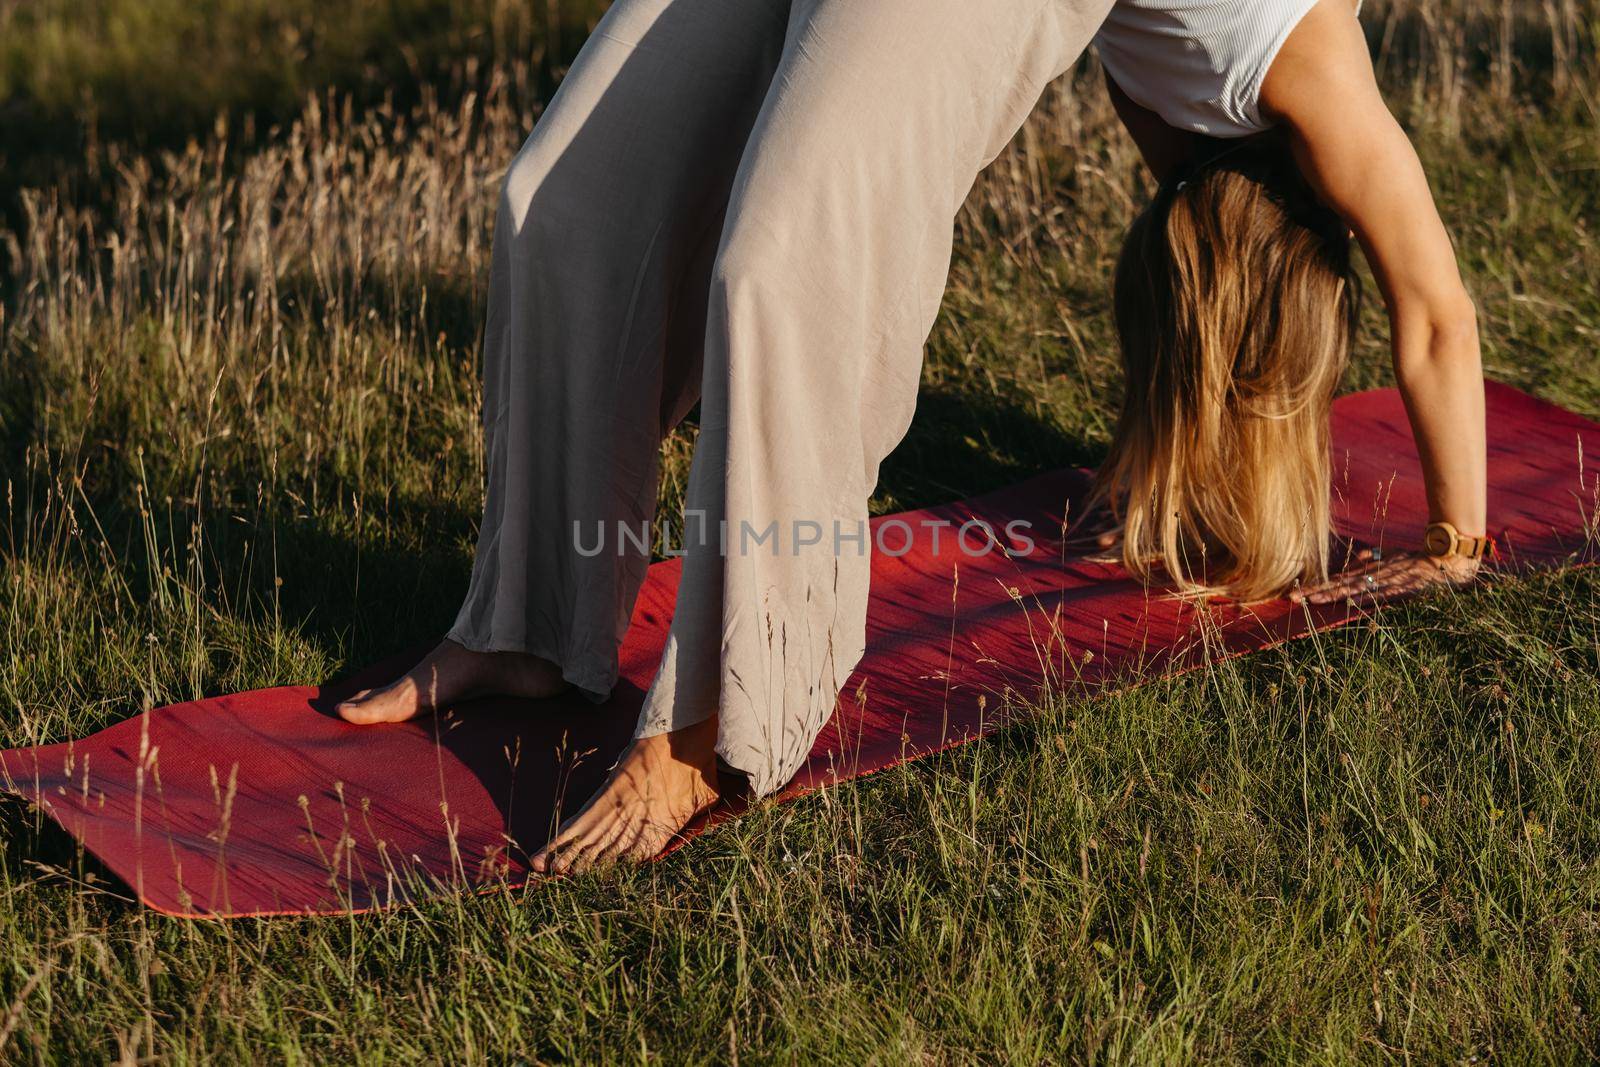 Close Up Unrecognisable Woman Doing Bridge Exercise on Mat During Yoga Practice Outdoors with Beautiful Background